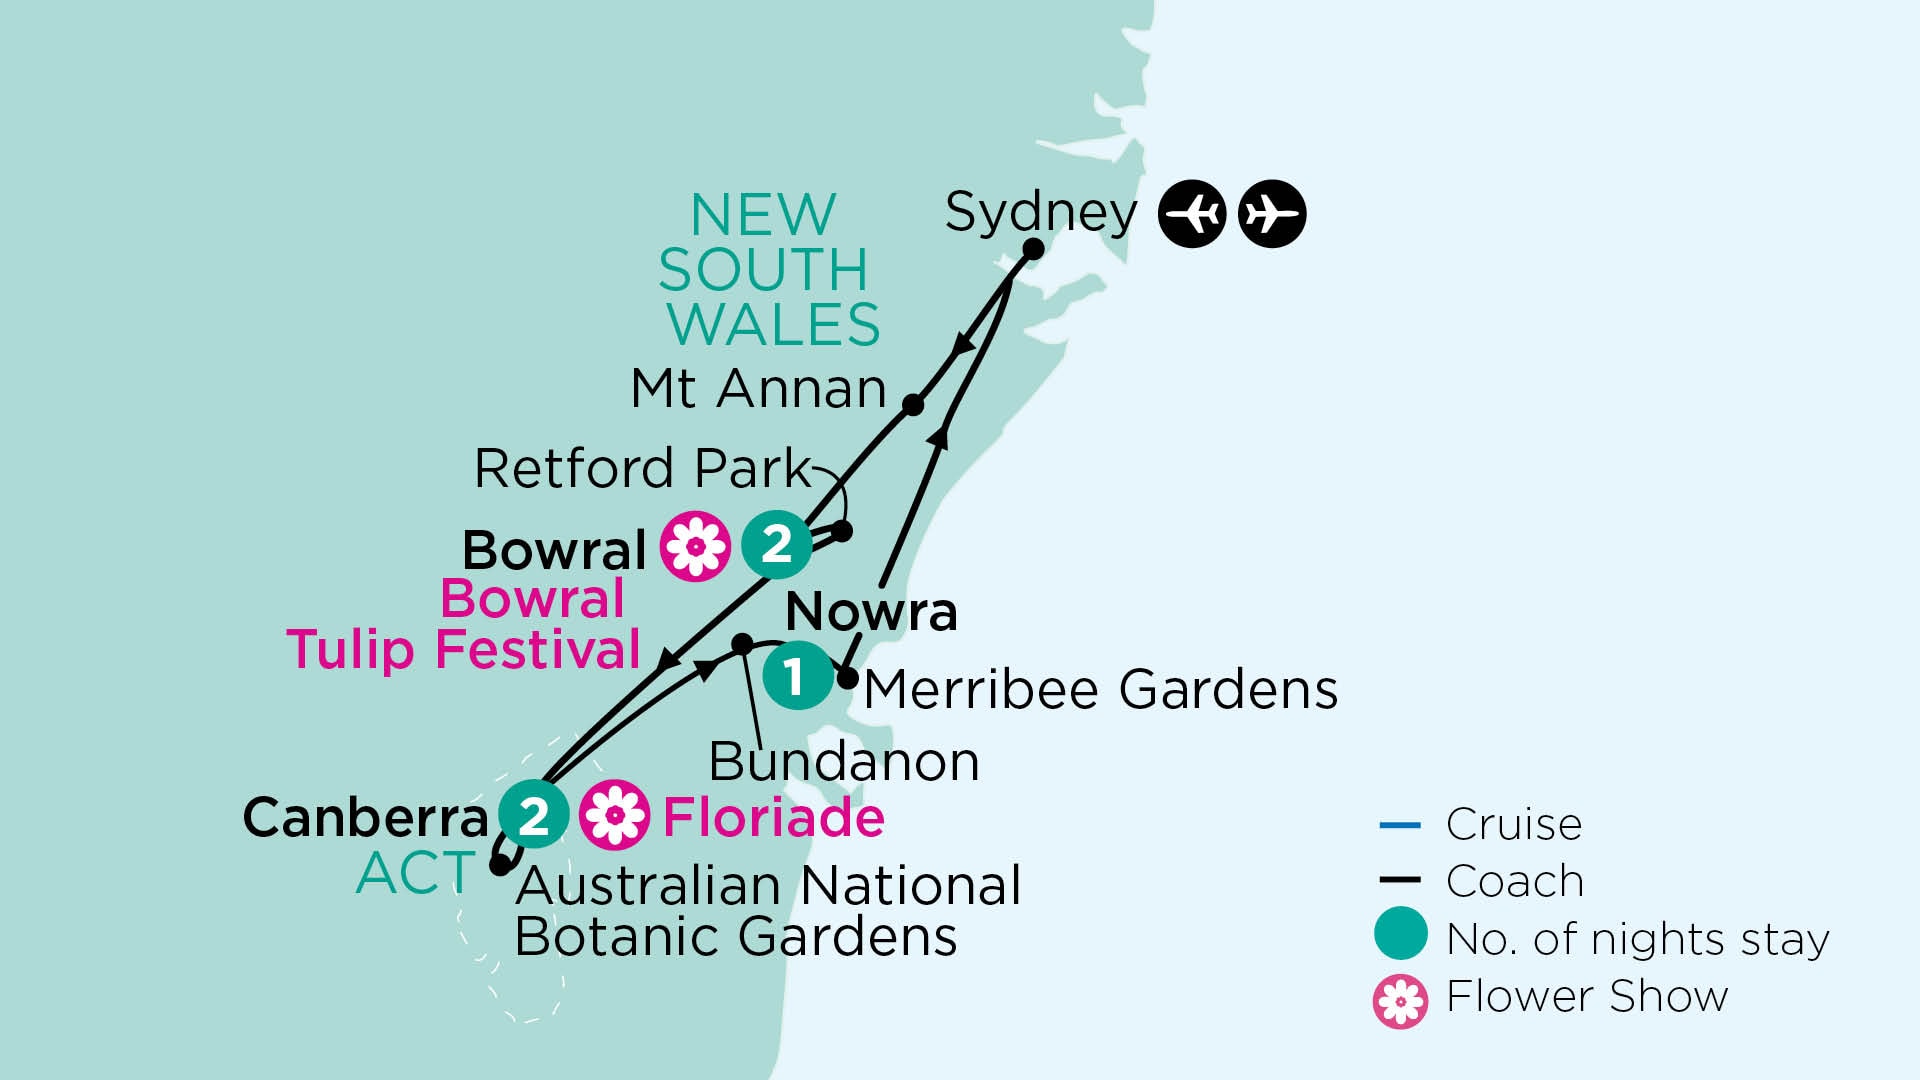 tourhub | APT | Canberra’s Floriade, New South Wales Tulips & Private Gardens | Tour Map